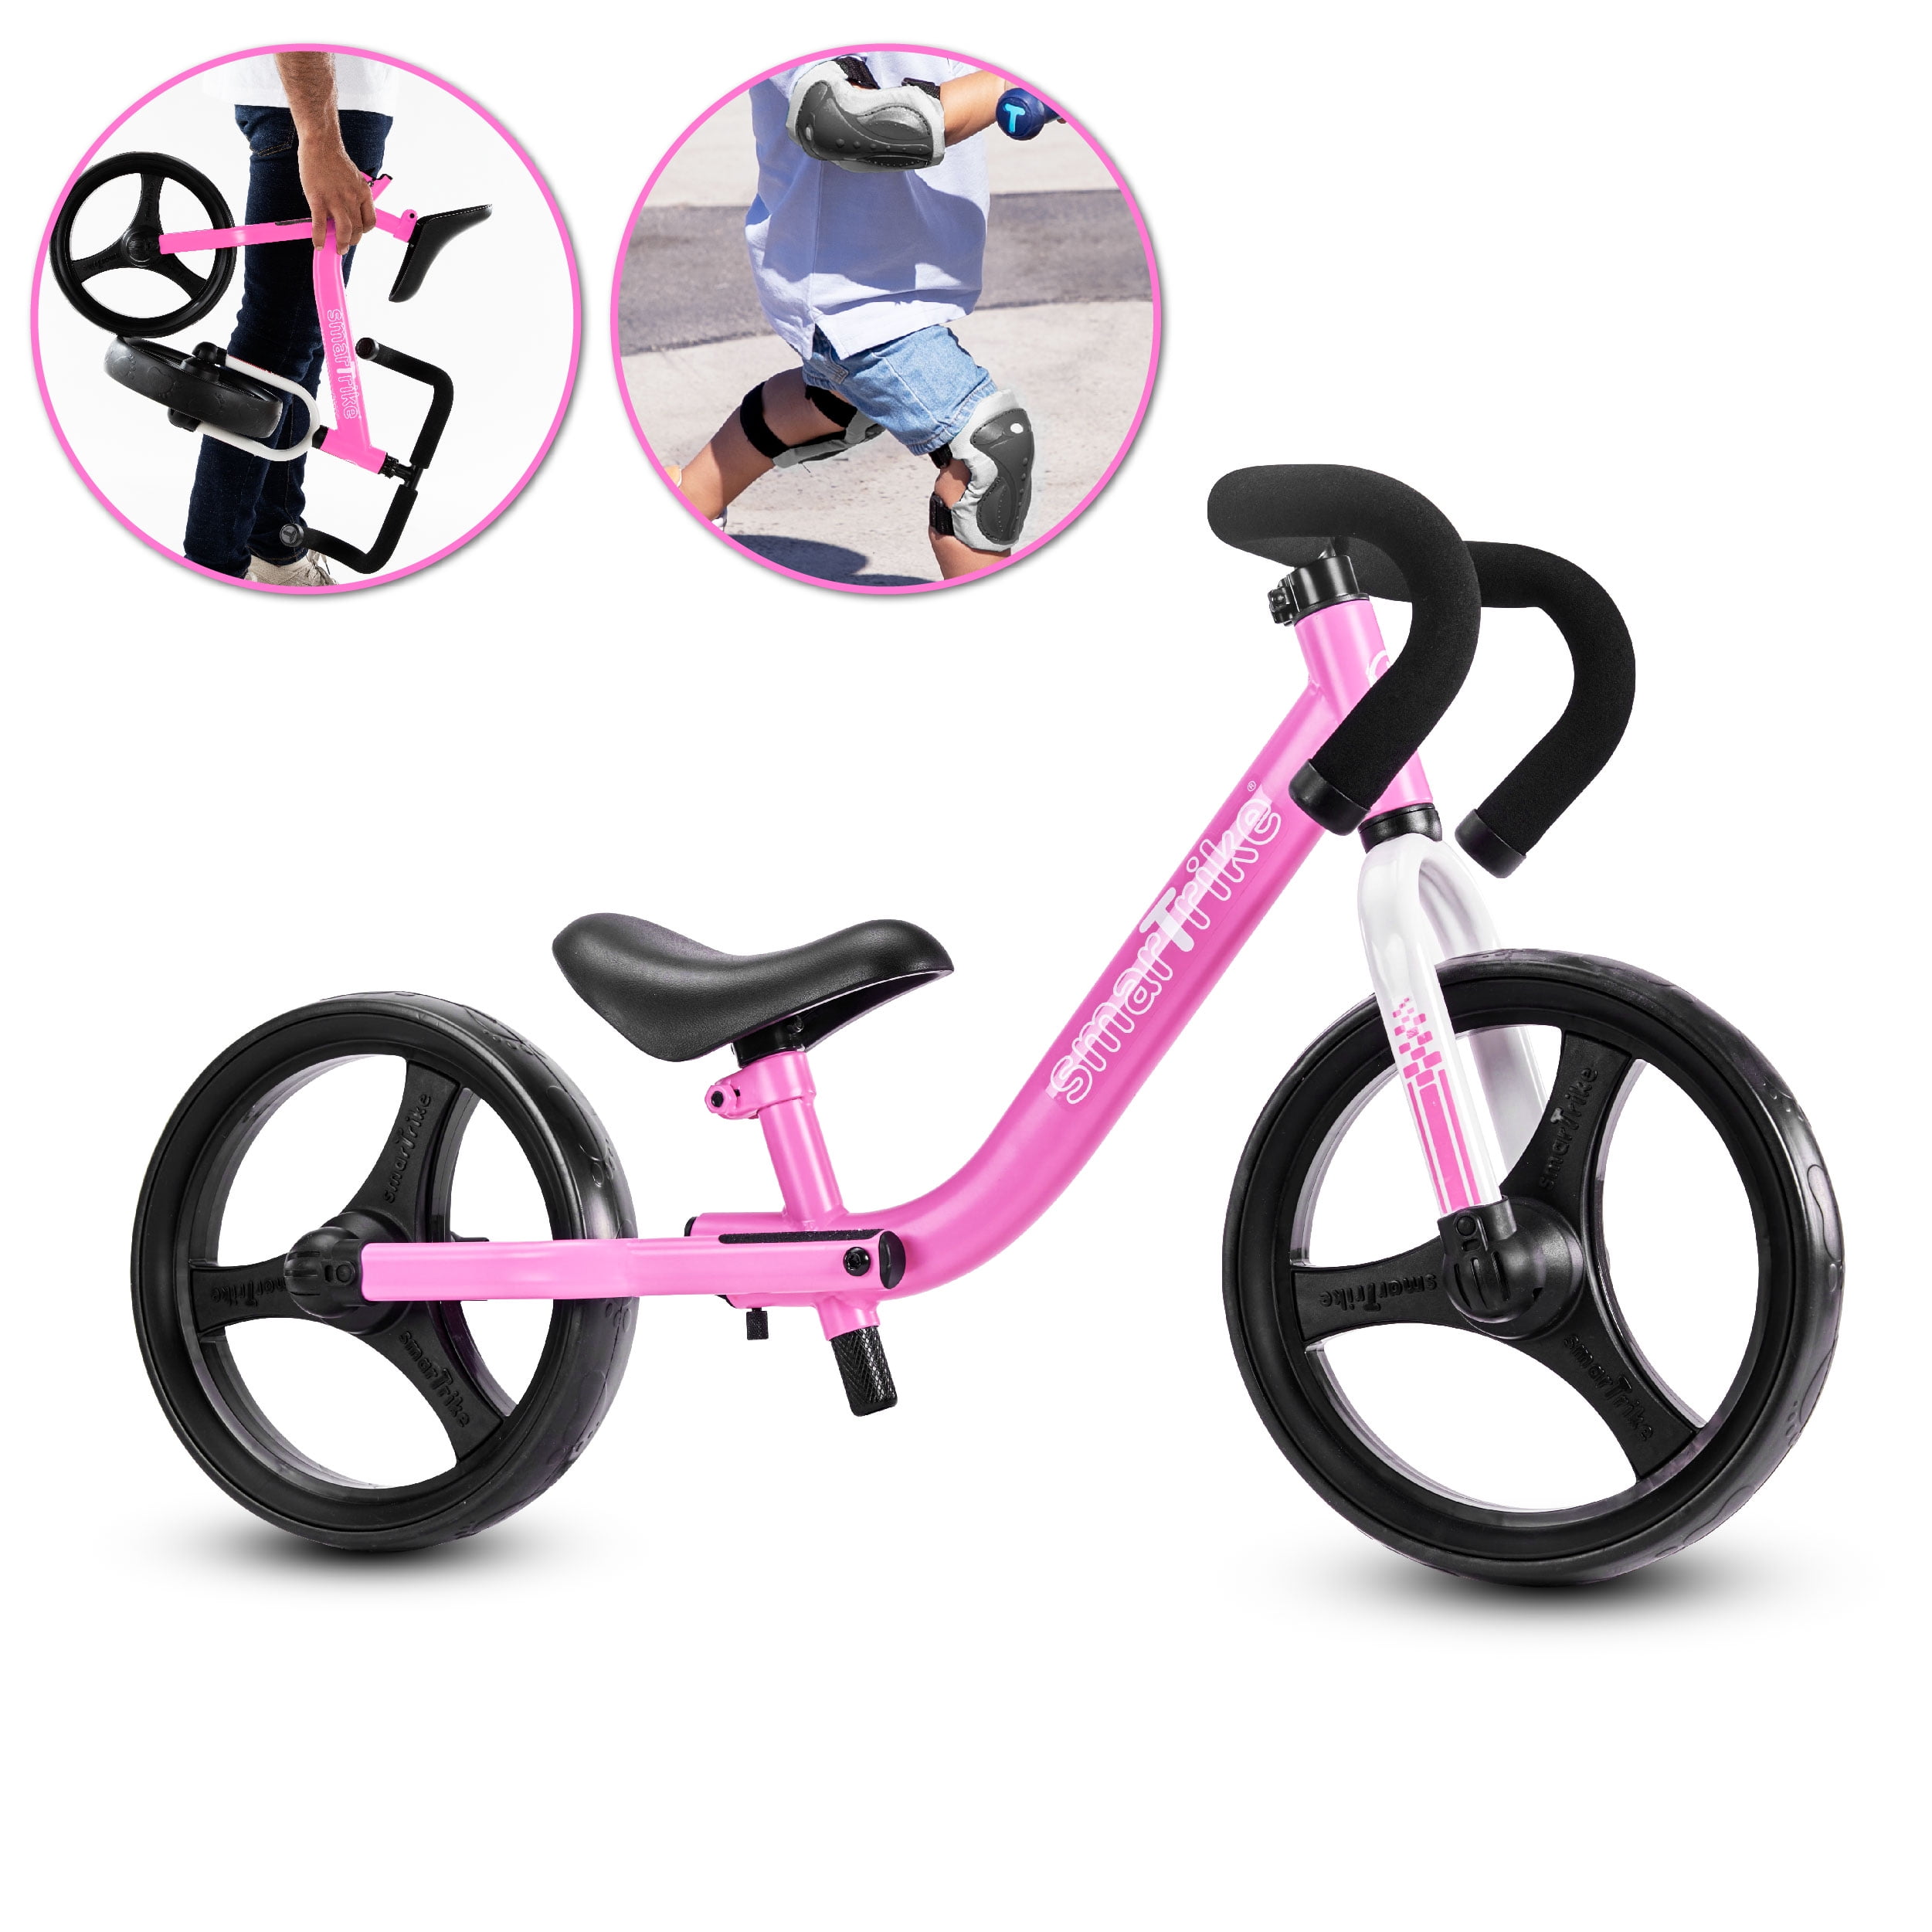 Red smarTrike Folding Balance Bike with Safety Gear for 2-5 Years Old 